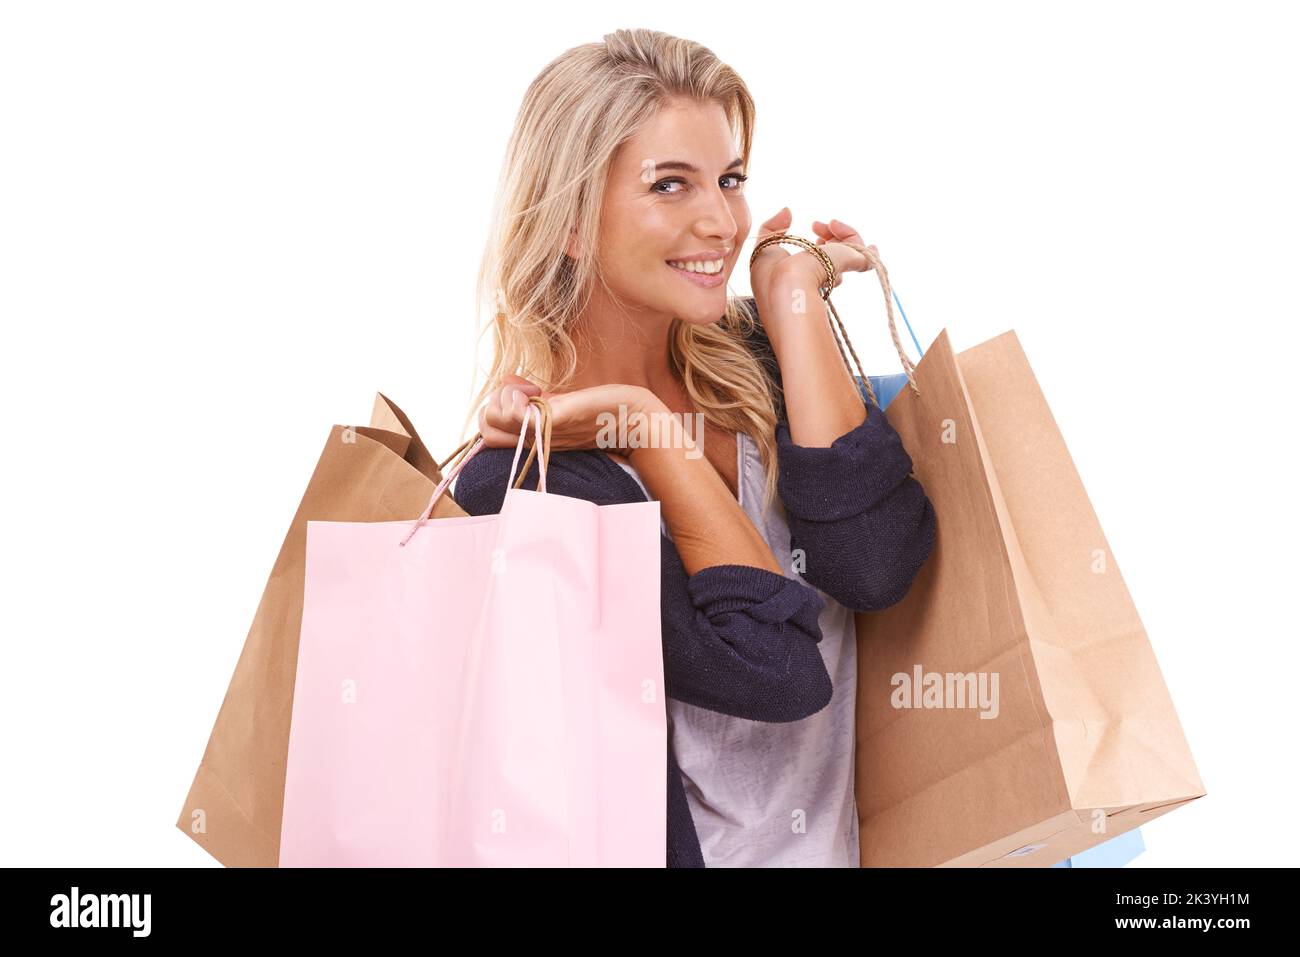 Smart shopping. A young woman holding shopping begs and looking pleased. Stock Photo